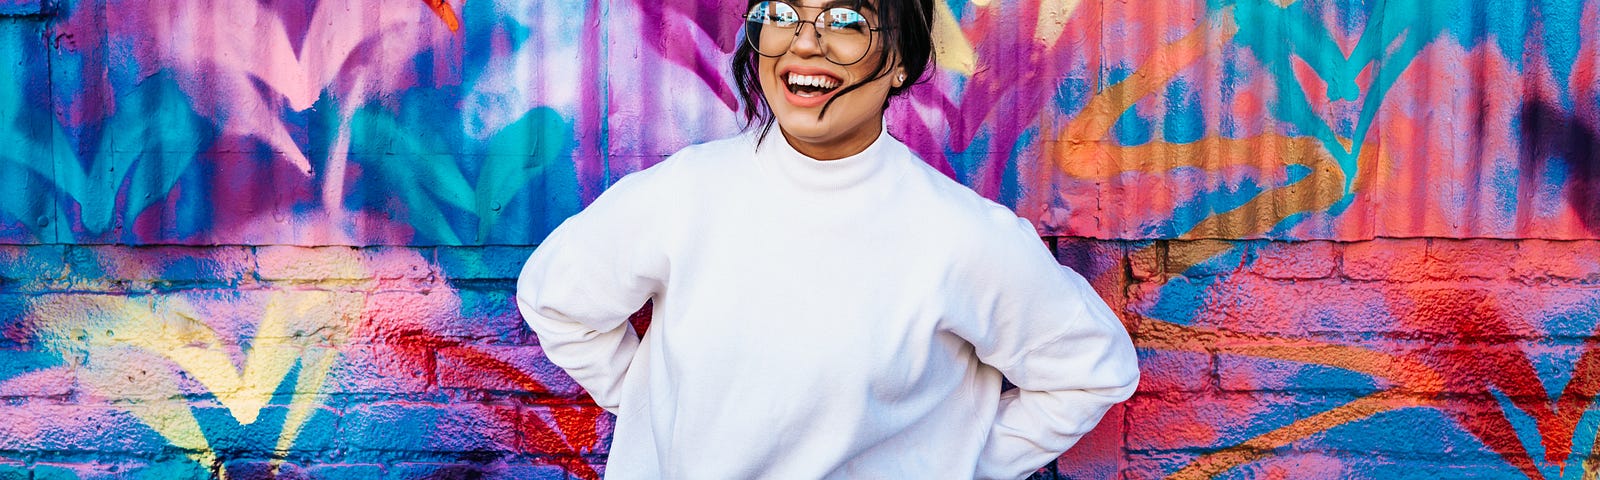 A girl with glasses smiling in front of the colorful graffiti wall